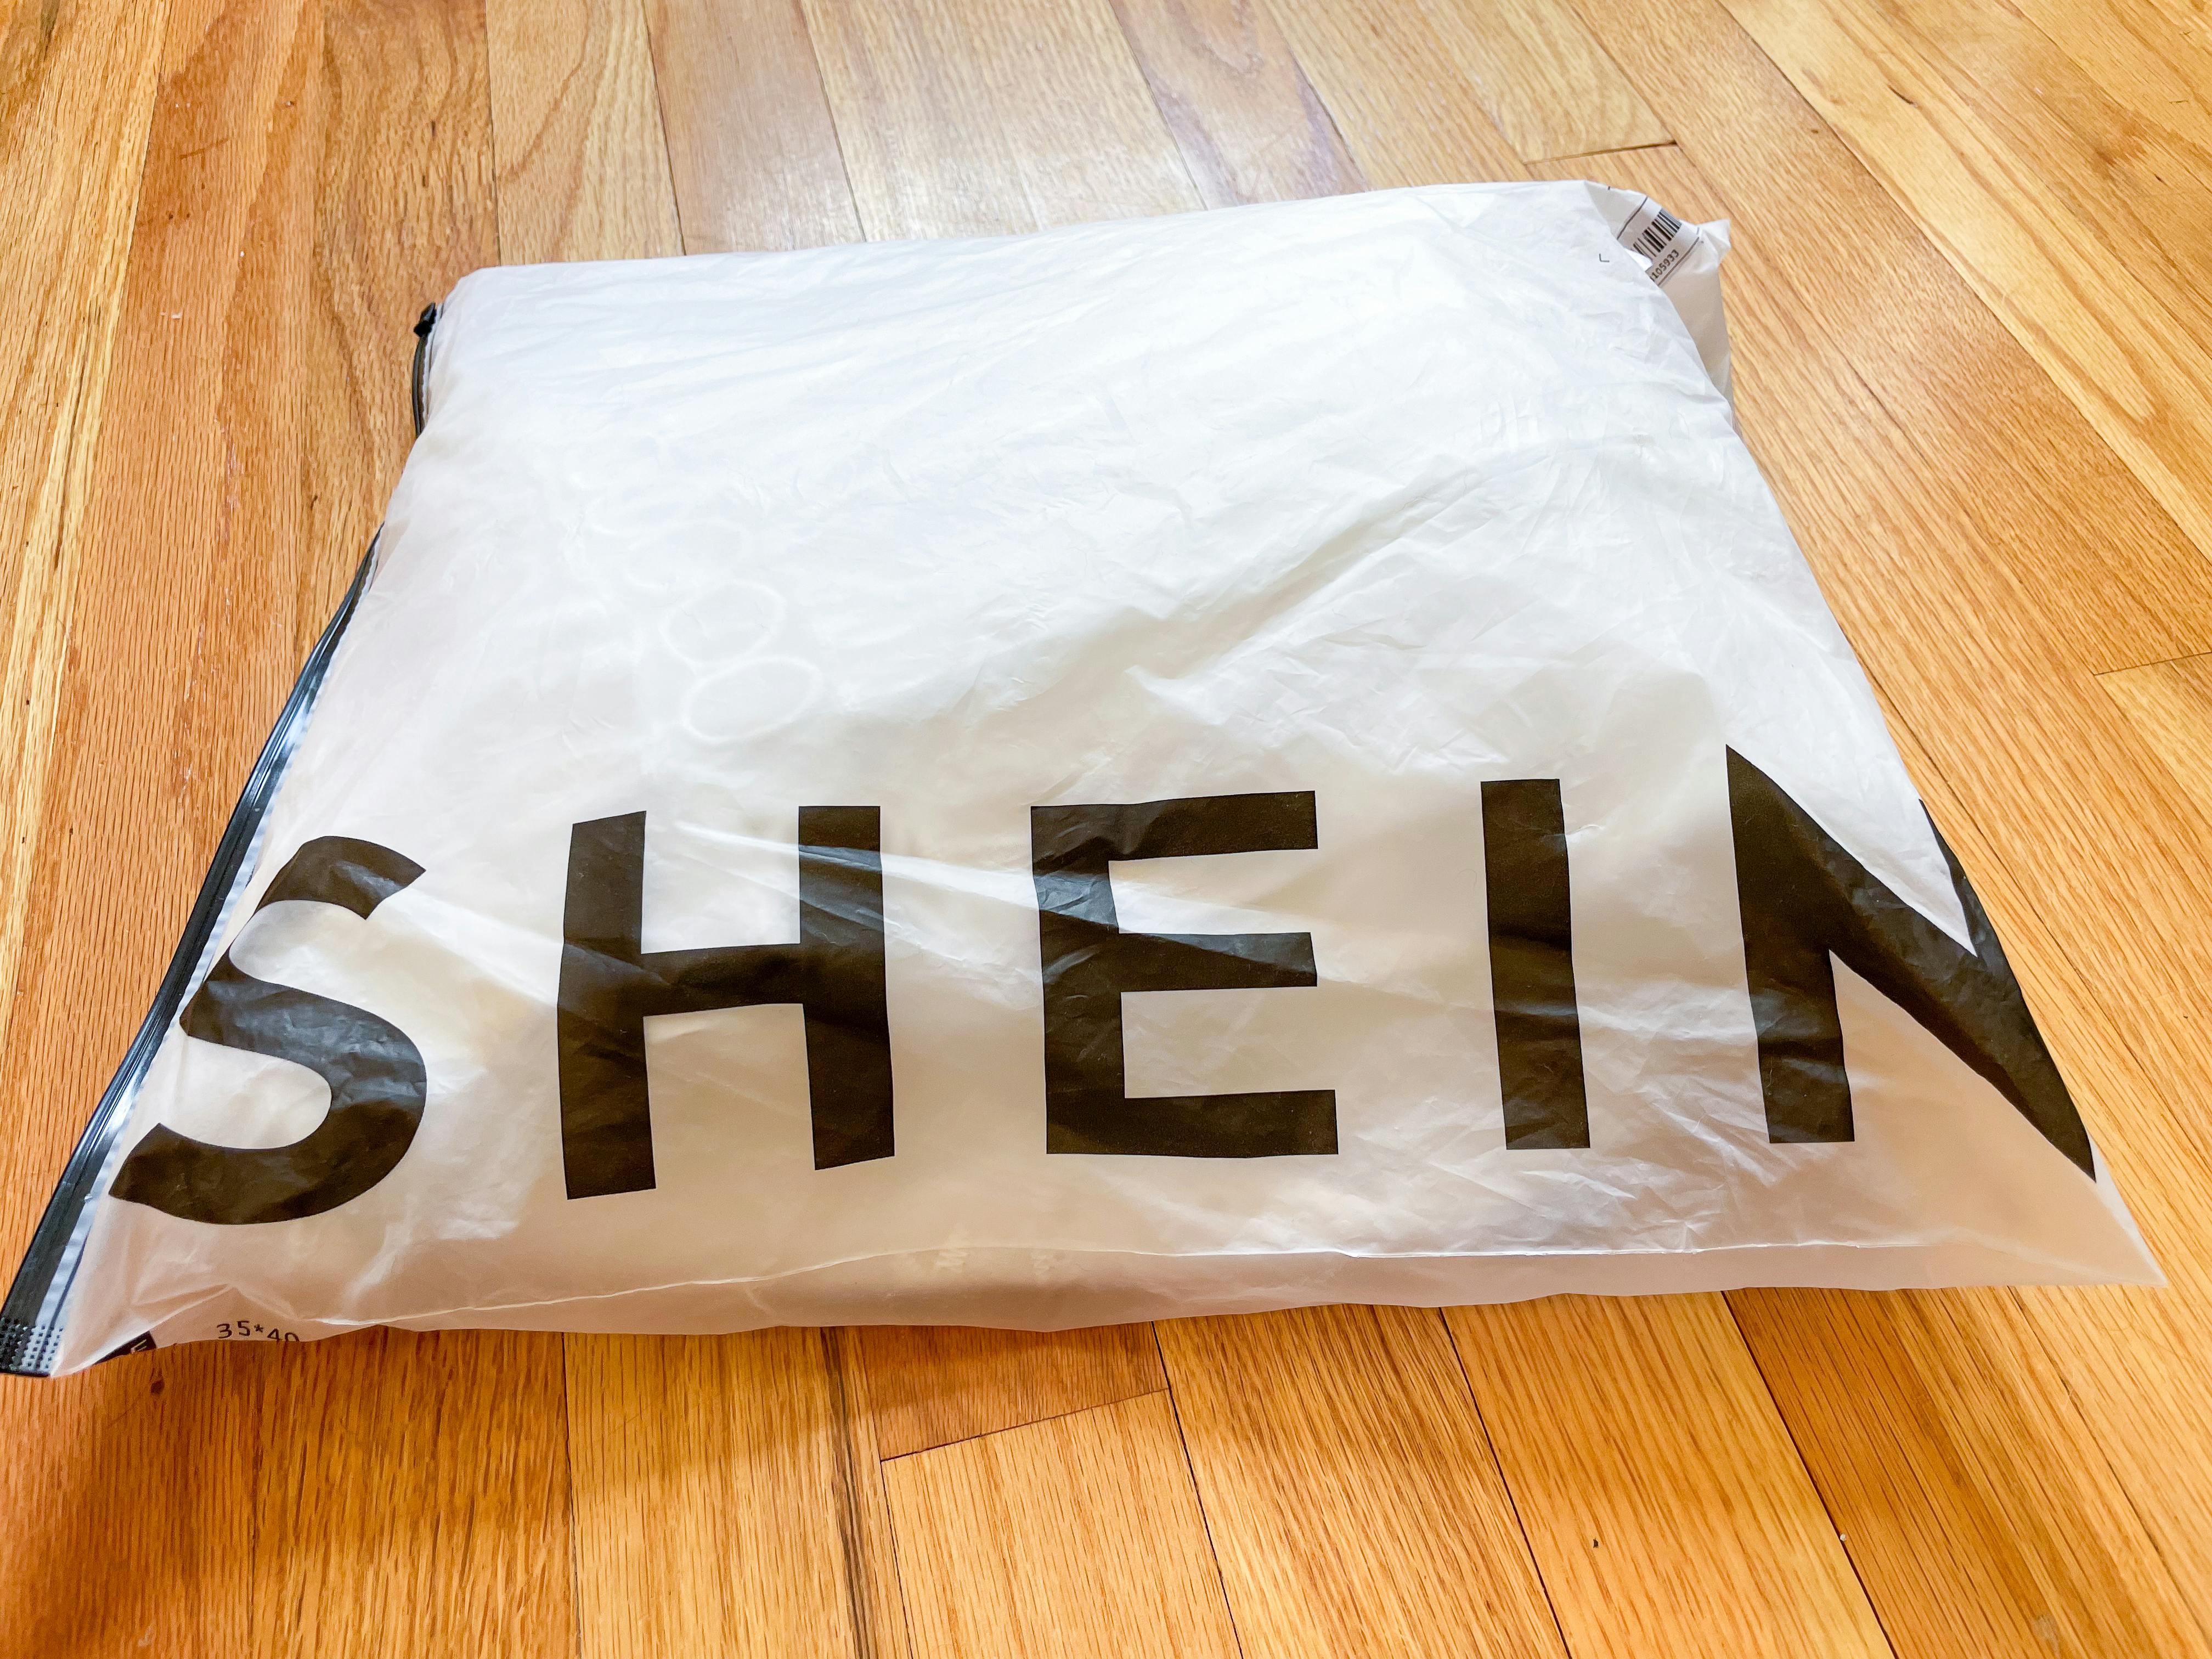 Shein Shipping Package 1 1660233345 1660233345 ?fit=crop&ar=1.91 1